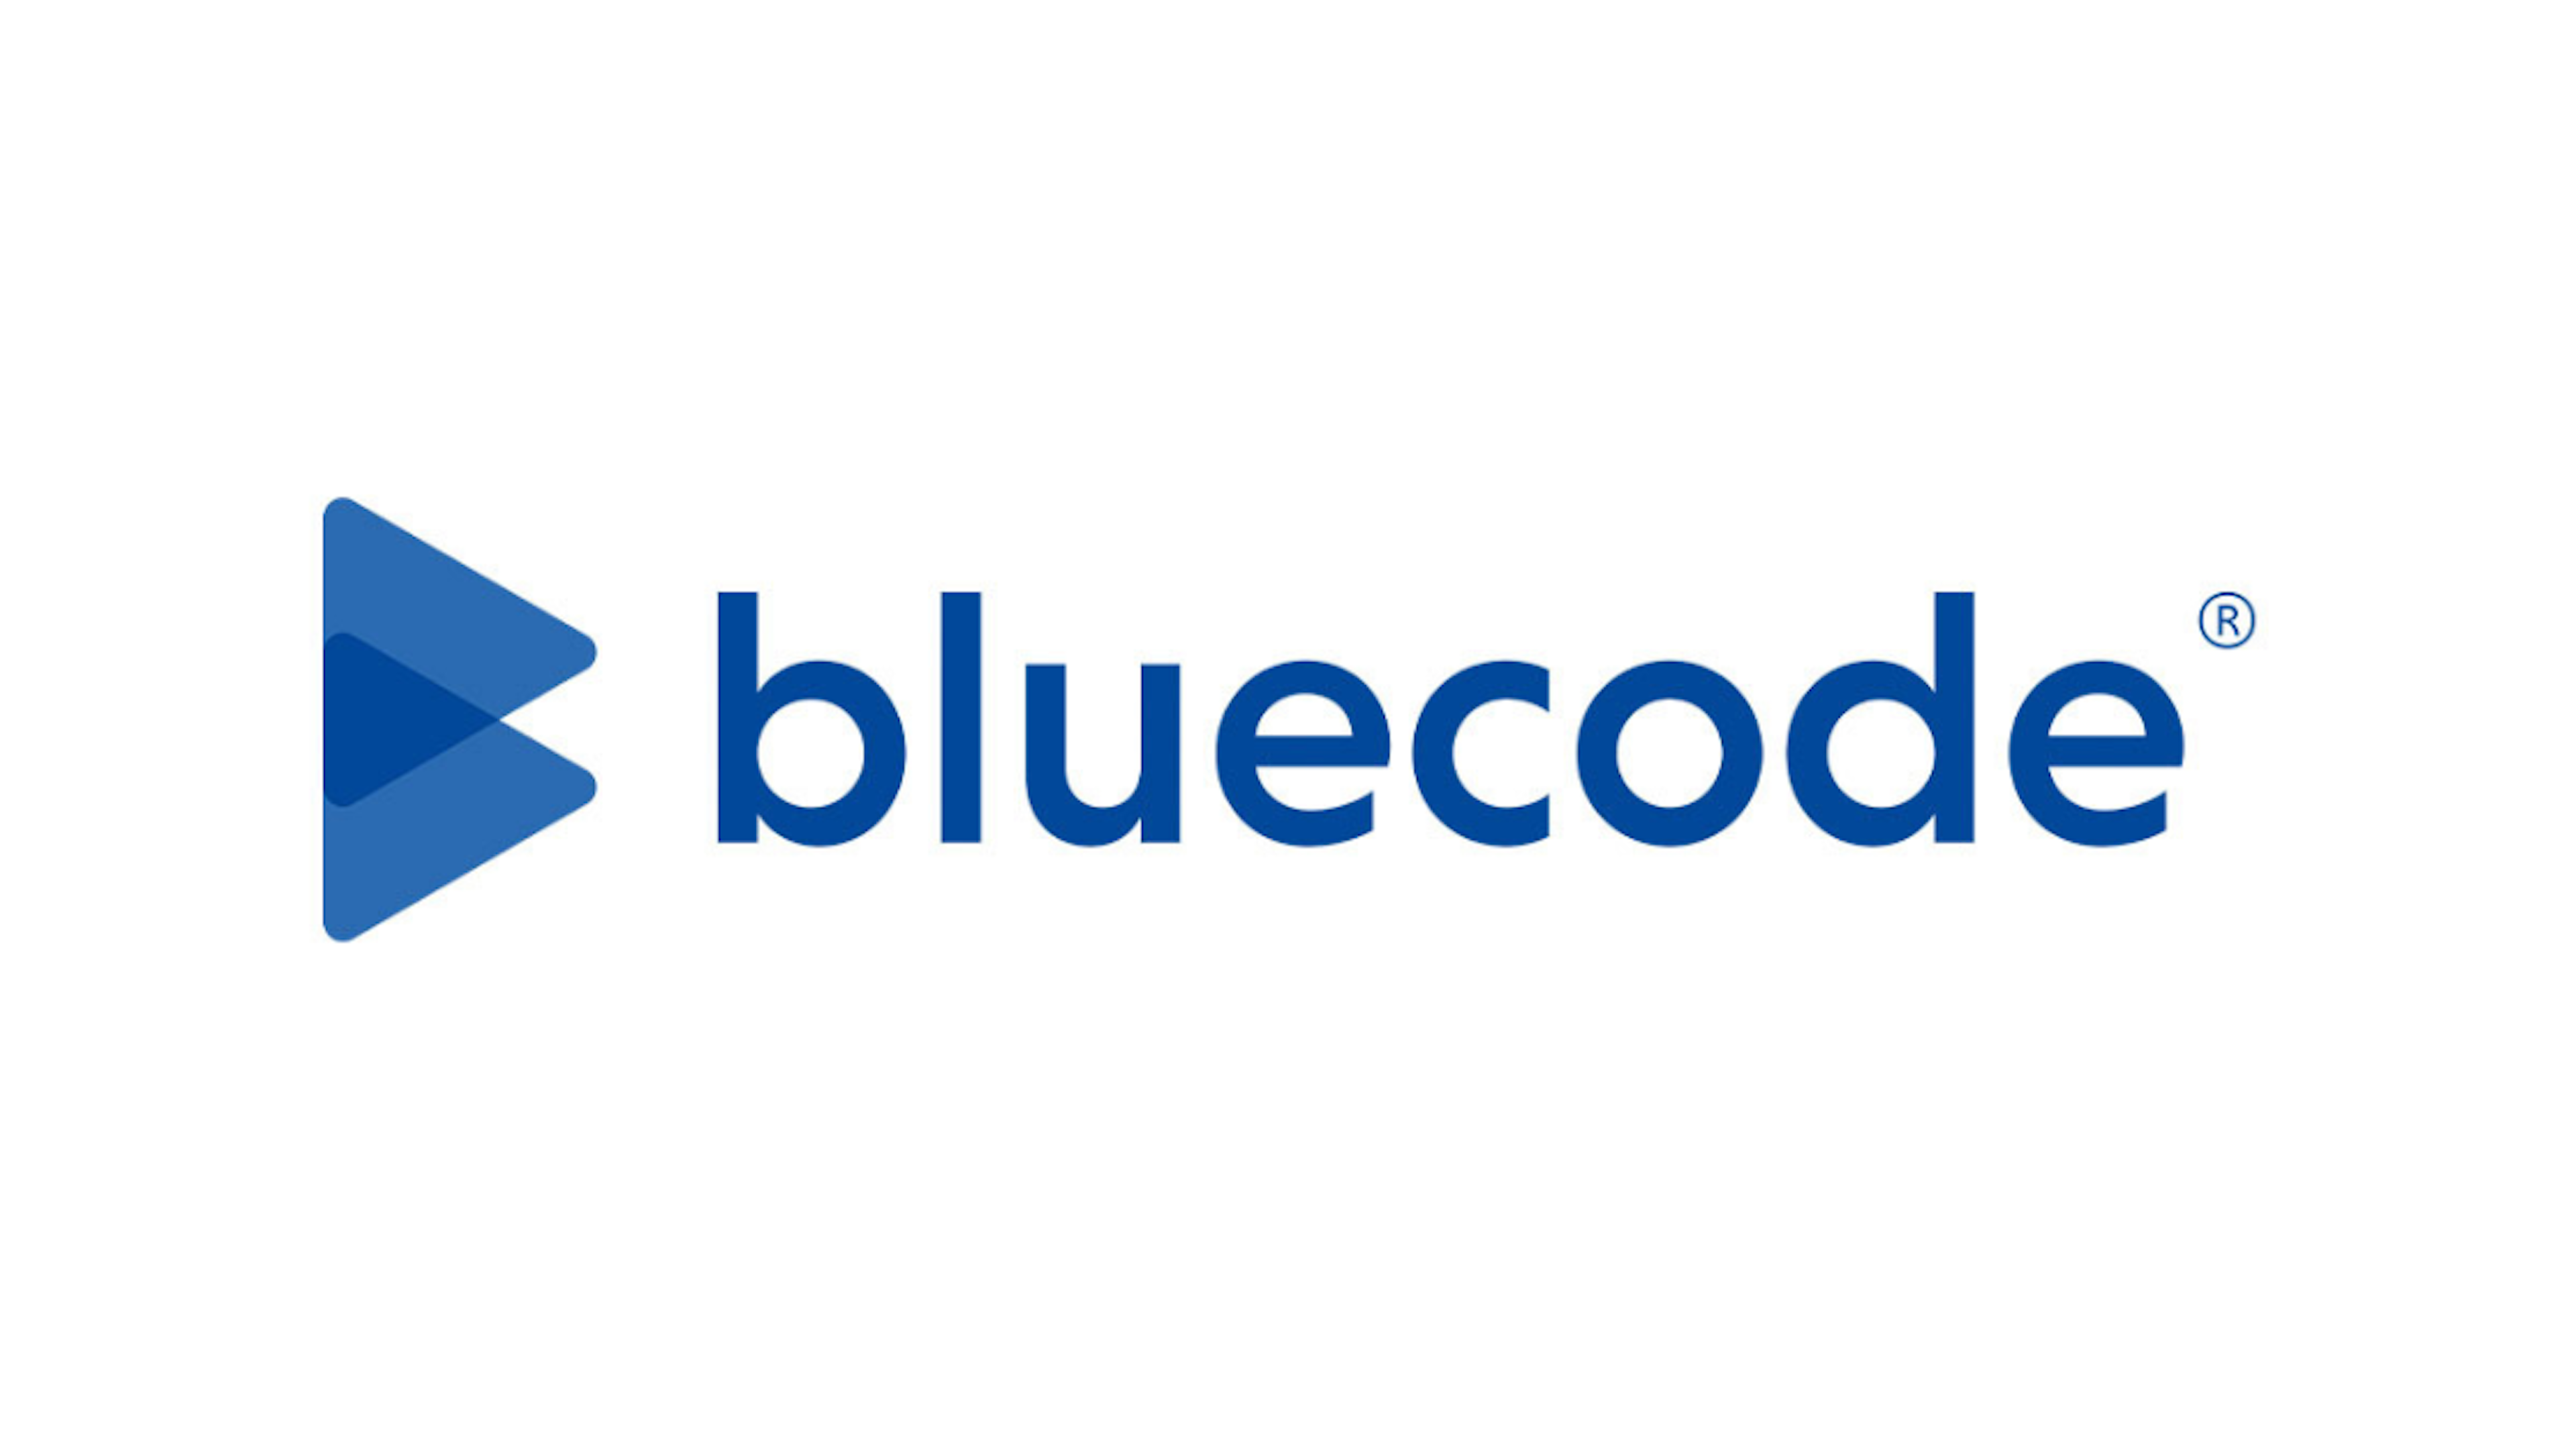 Functional Workplaces: Bluecode - Working on the Future of Mobile Payments